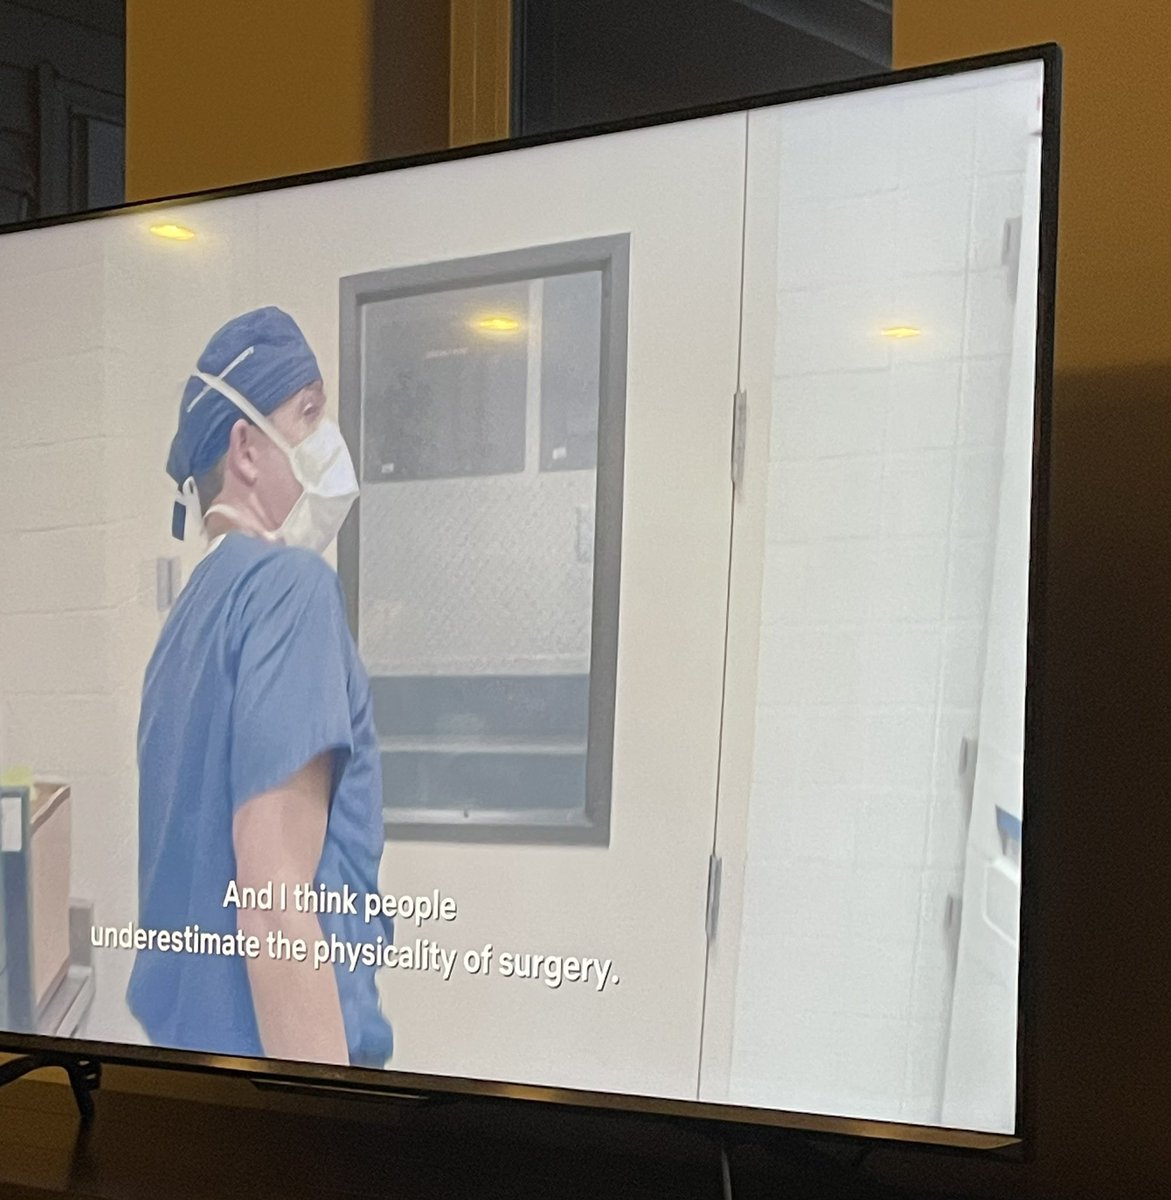 #SurgErgo has made primetime! Was 👀 Emergency NYC on @netflix and a neurosurgeon commented on the “physicality” of surgery and used a massager in his office. @SurgErgonomics @SocSurgErgo @pihaigh @TaraCohenPhD @dramypark